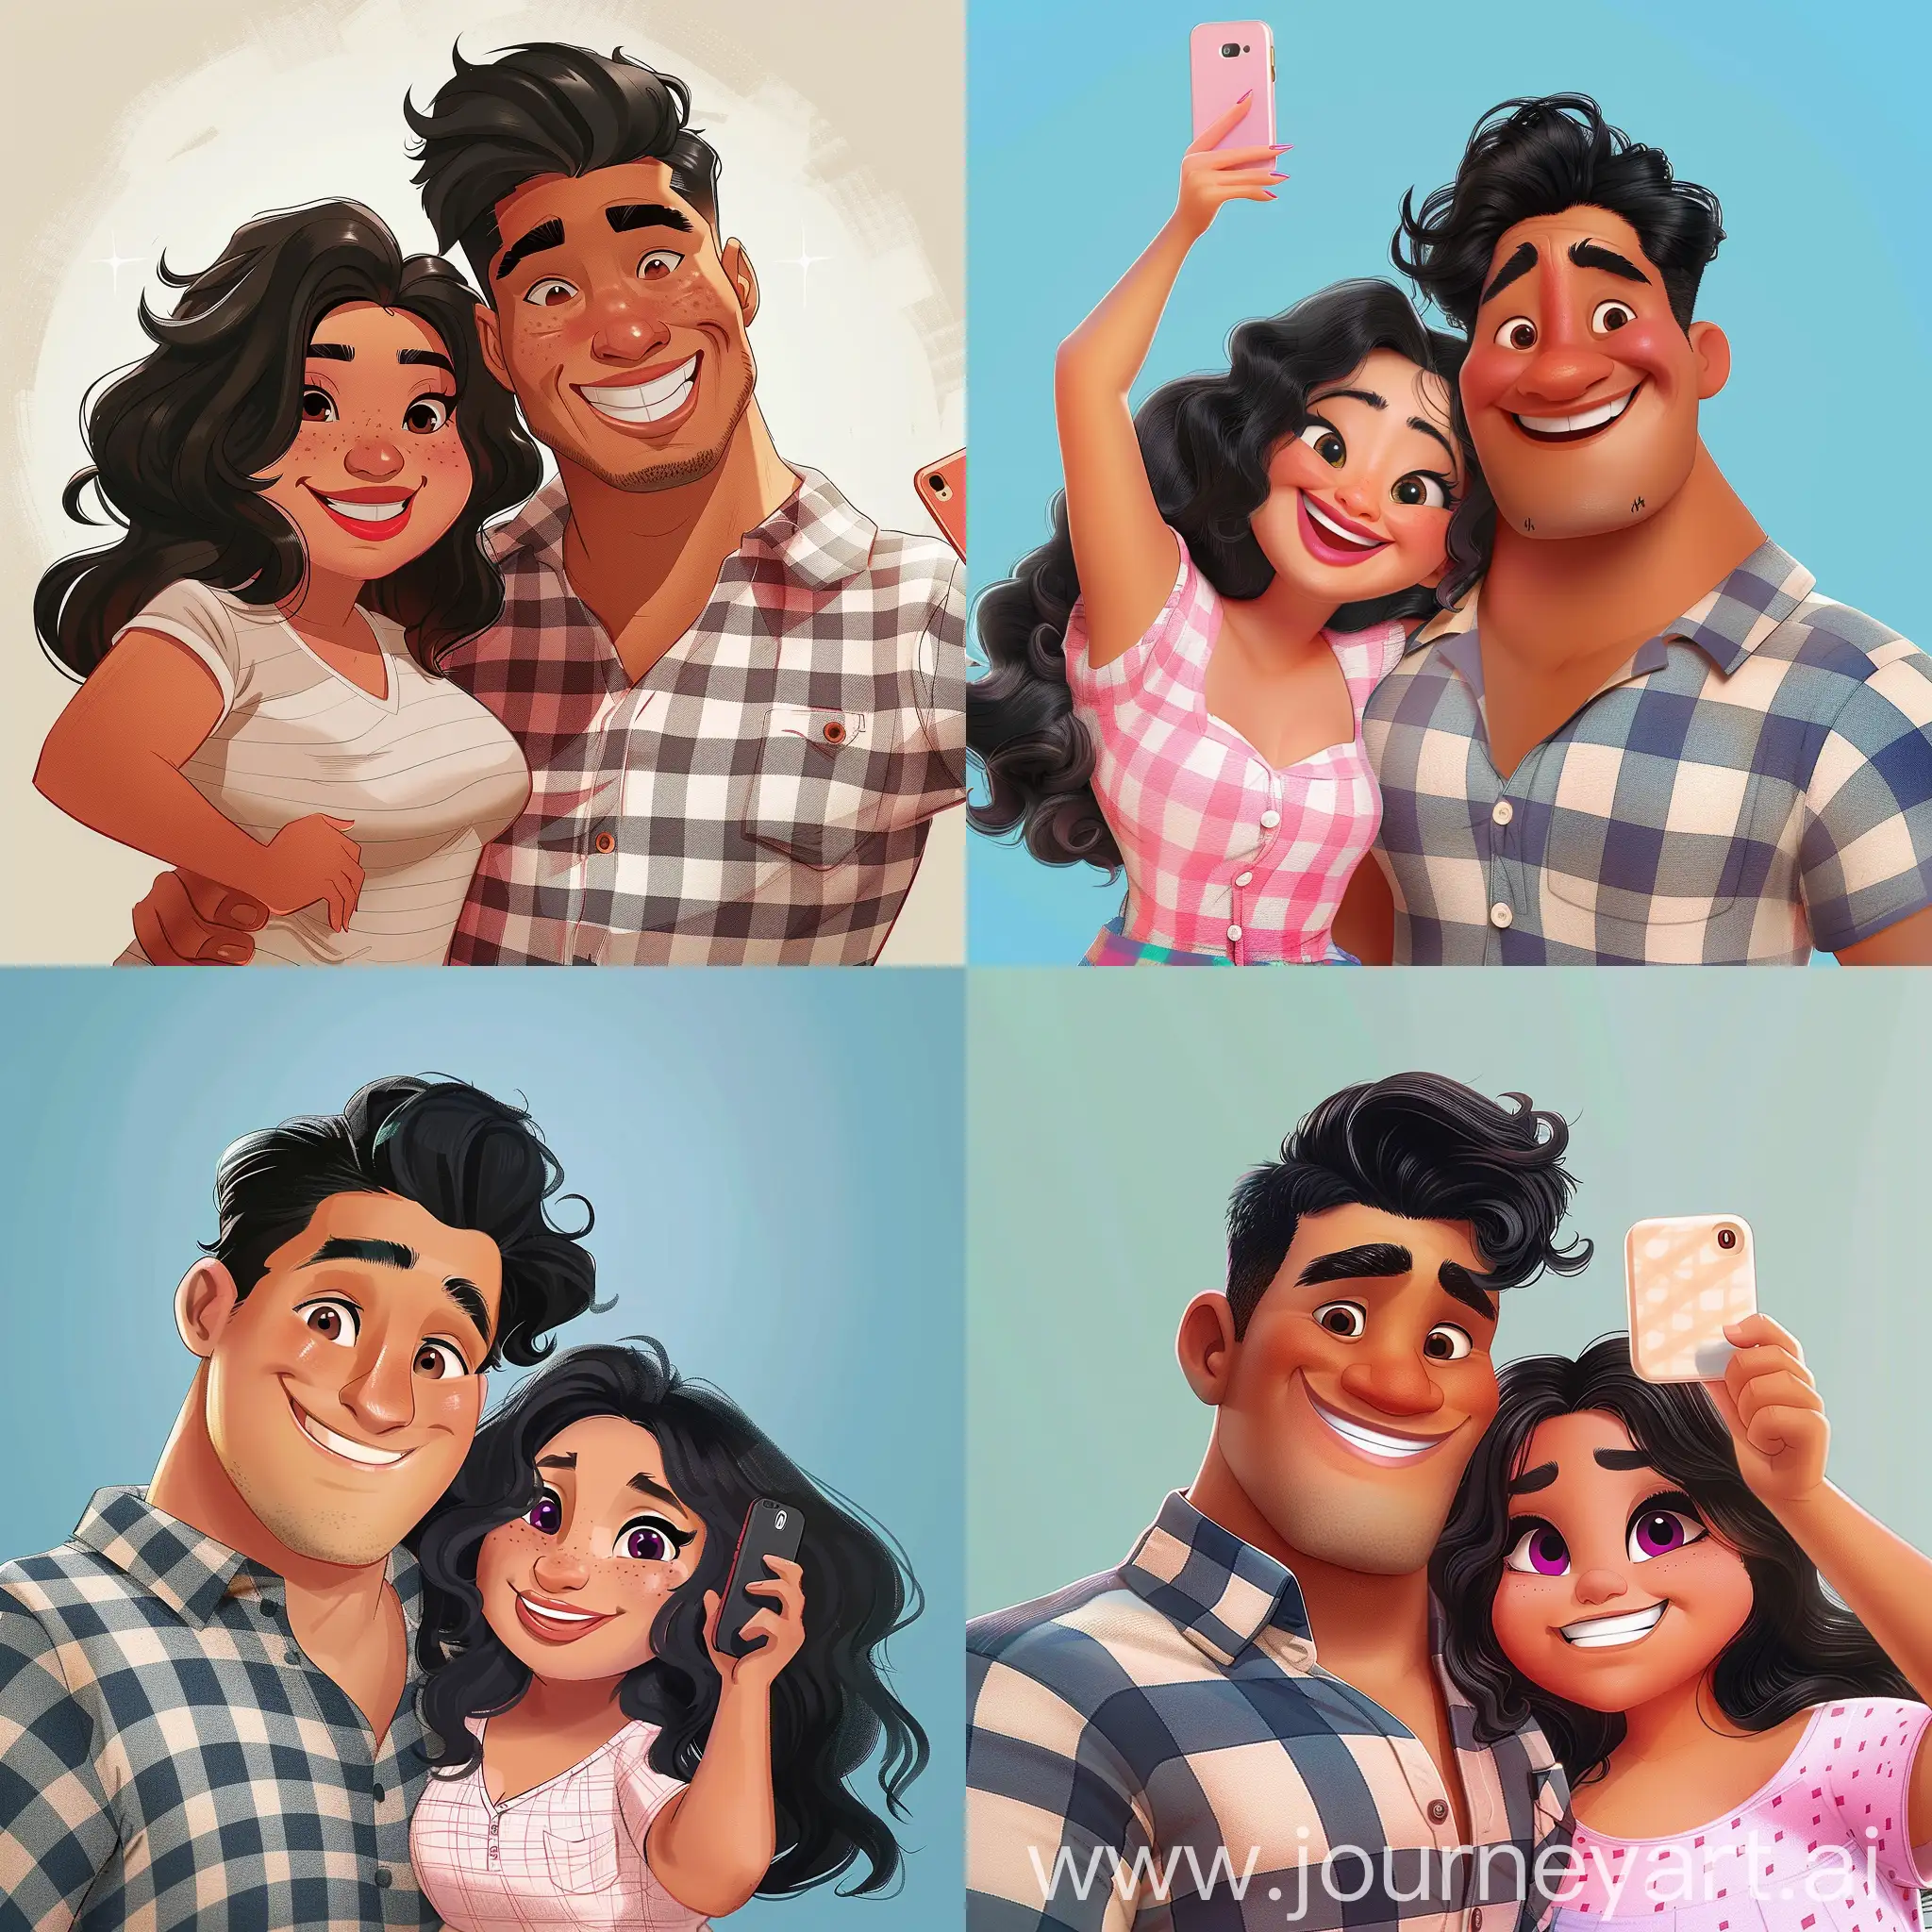 Happy-Diverse-Friends-Taking-Selfie-Smiling-Guy-and-Chubby-Girl-Cartoon-Illustration